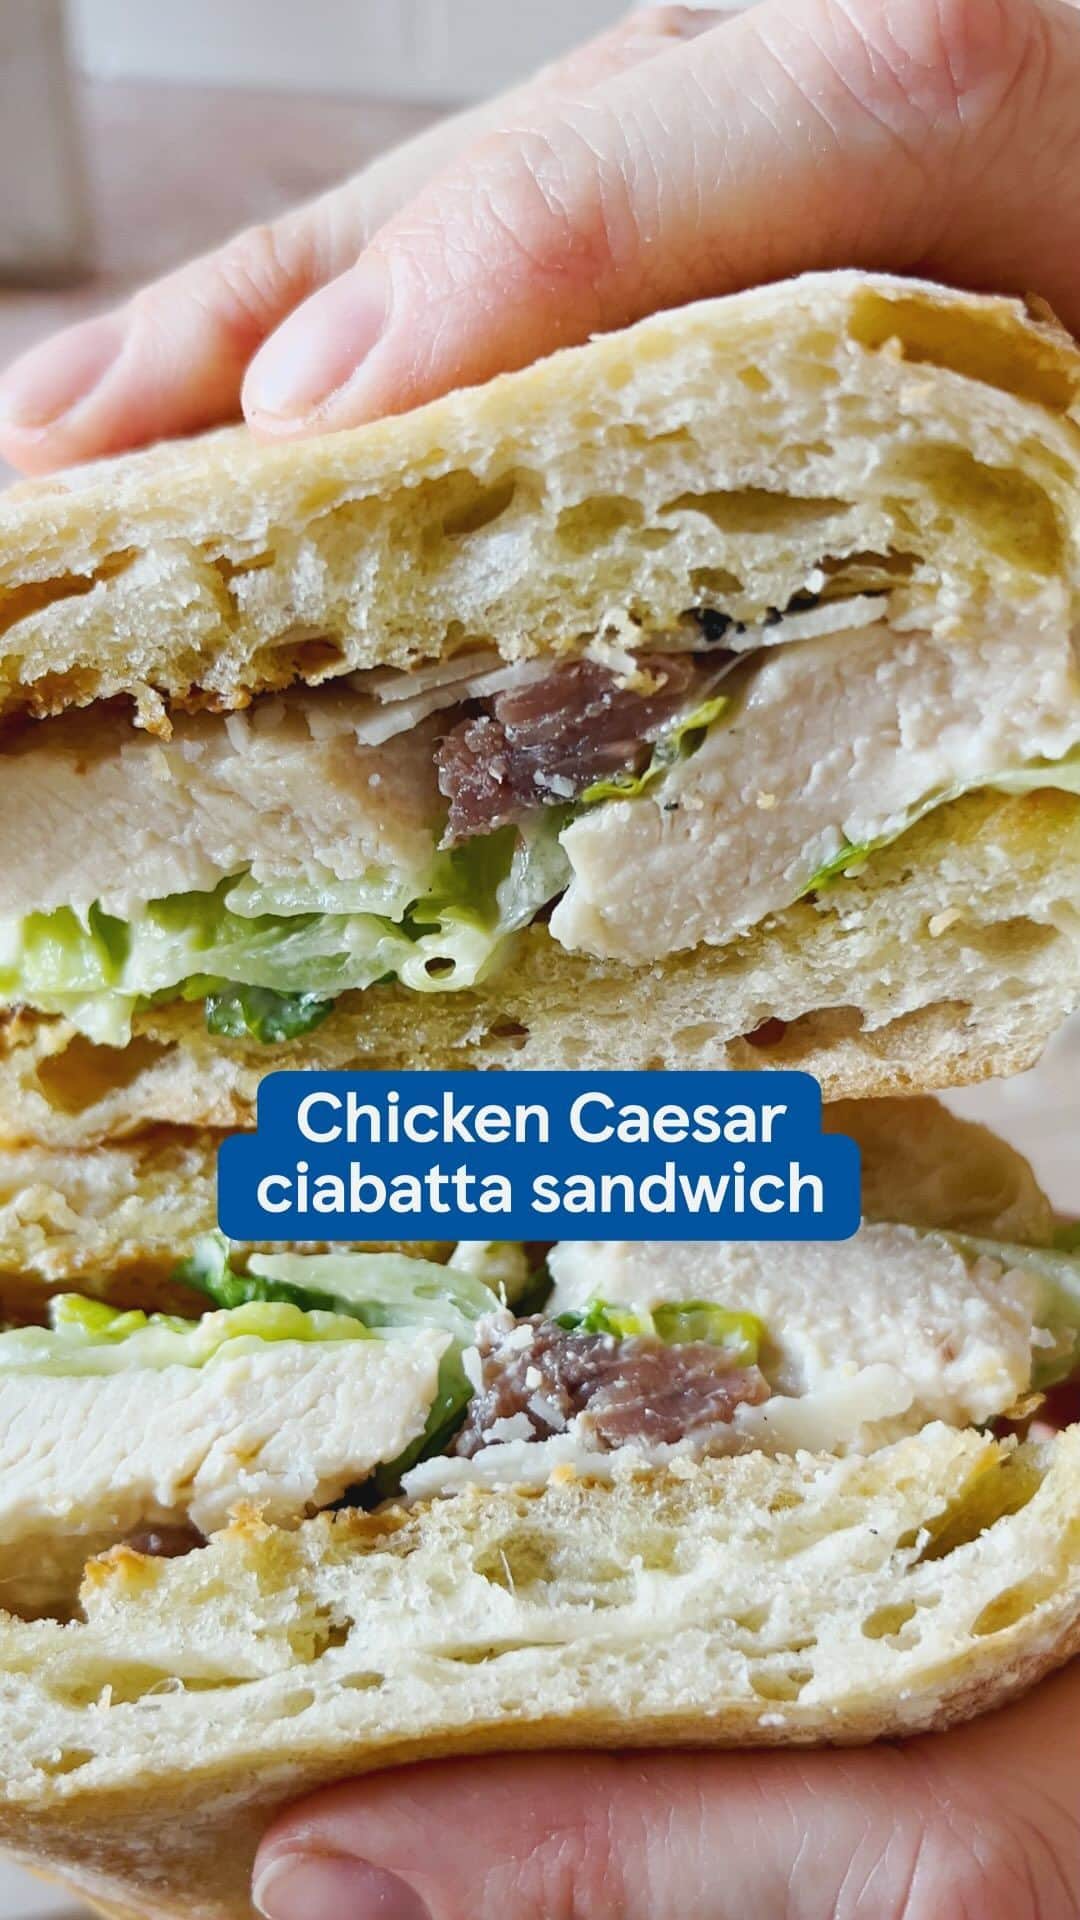 Tesco Food Officialのインスタグラム：「It’s September Sarnie Season! Transform your favourite salad into the ultimate super sandwich with our chicken Caesar ciabatta recipe by heading to the link in the bio.」